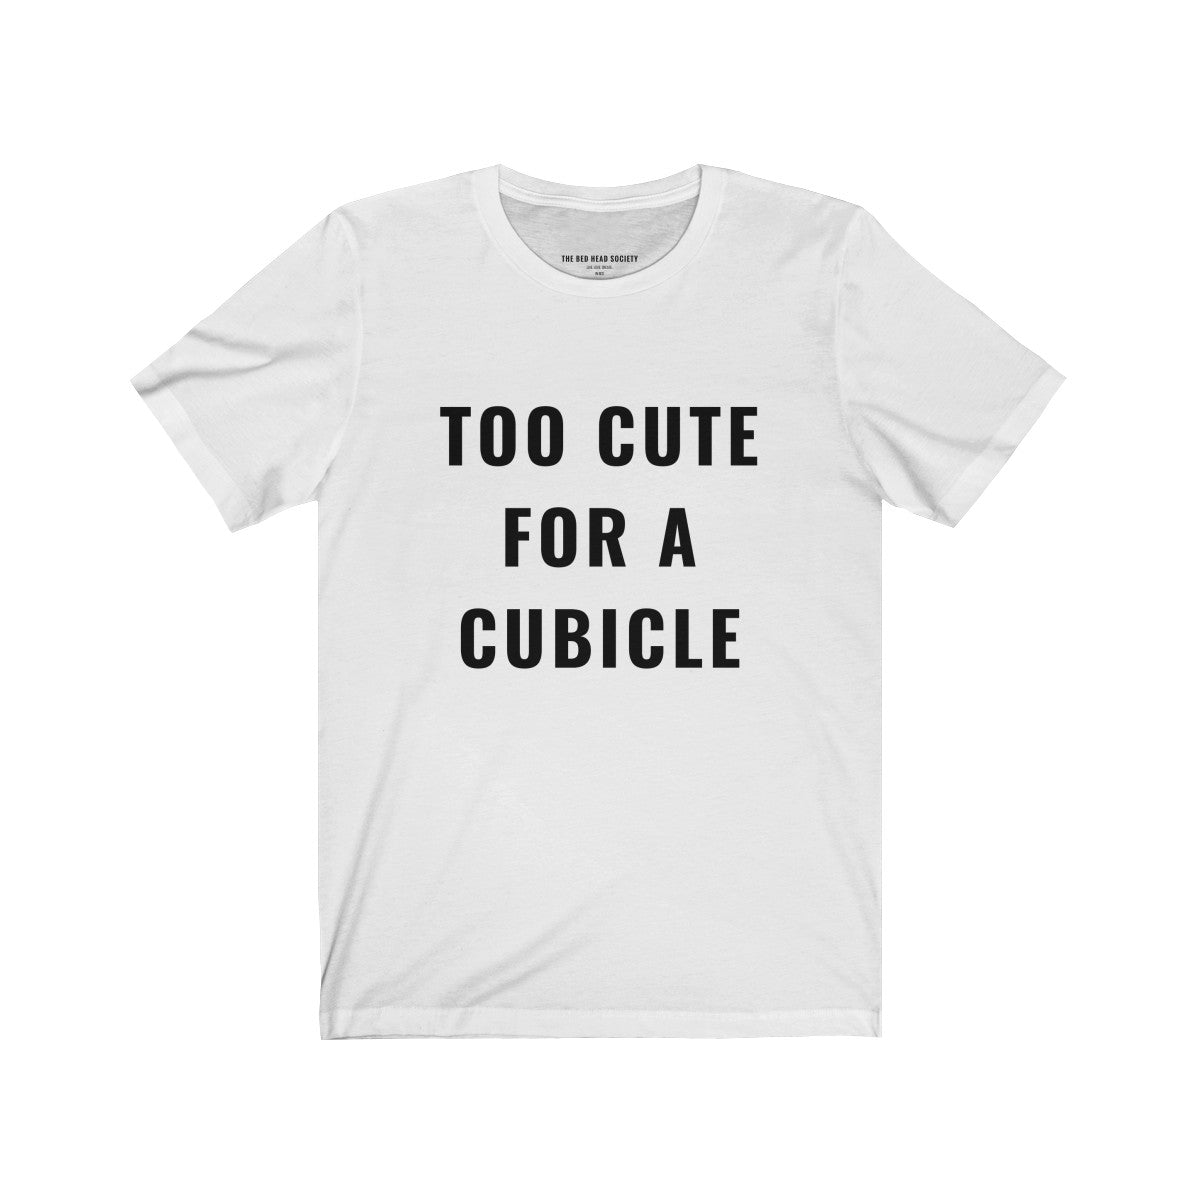 Too Cute For A Cubicle T-Shirt - Shop Bed Head Society